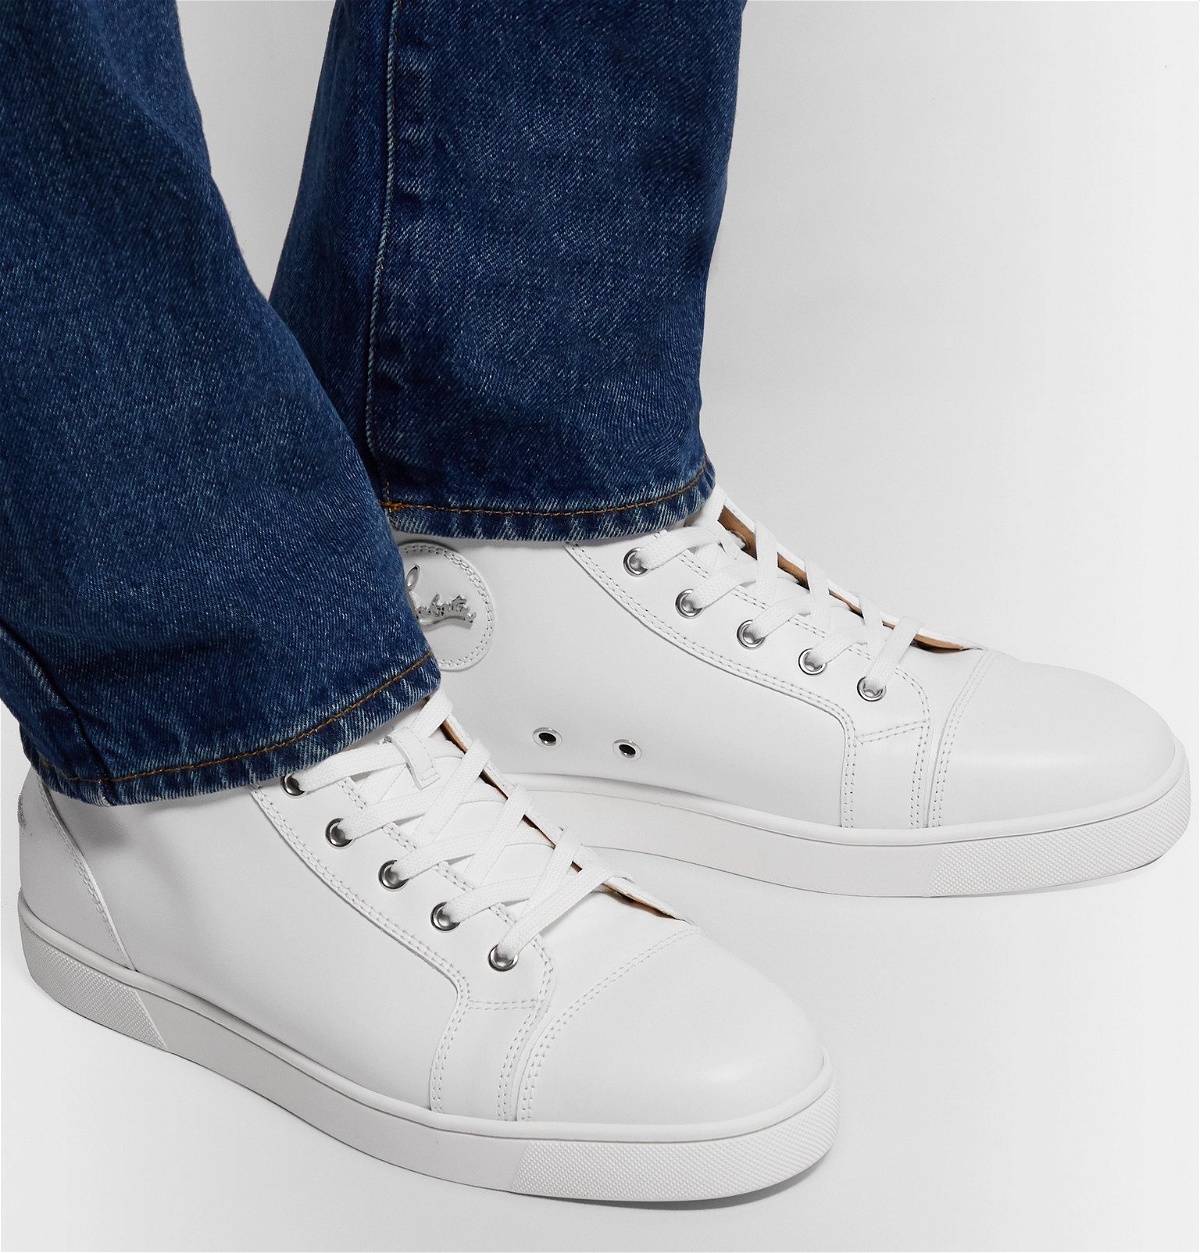 Louis - High-top sneakers - Calf leather - White - Christian Louboutin